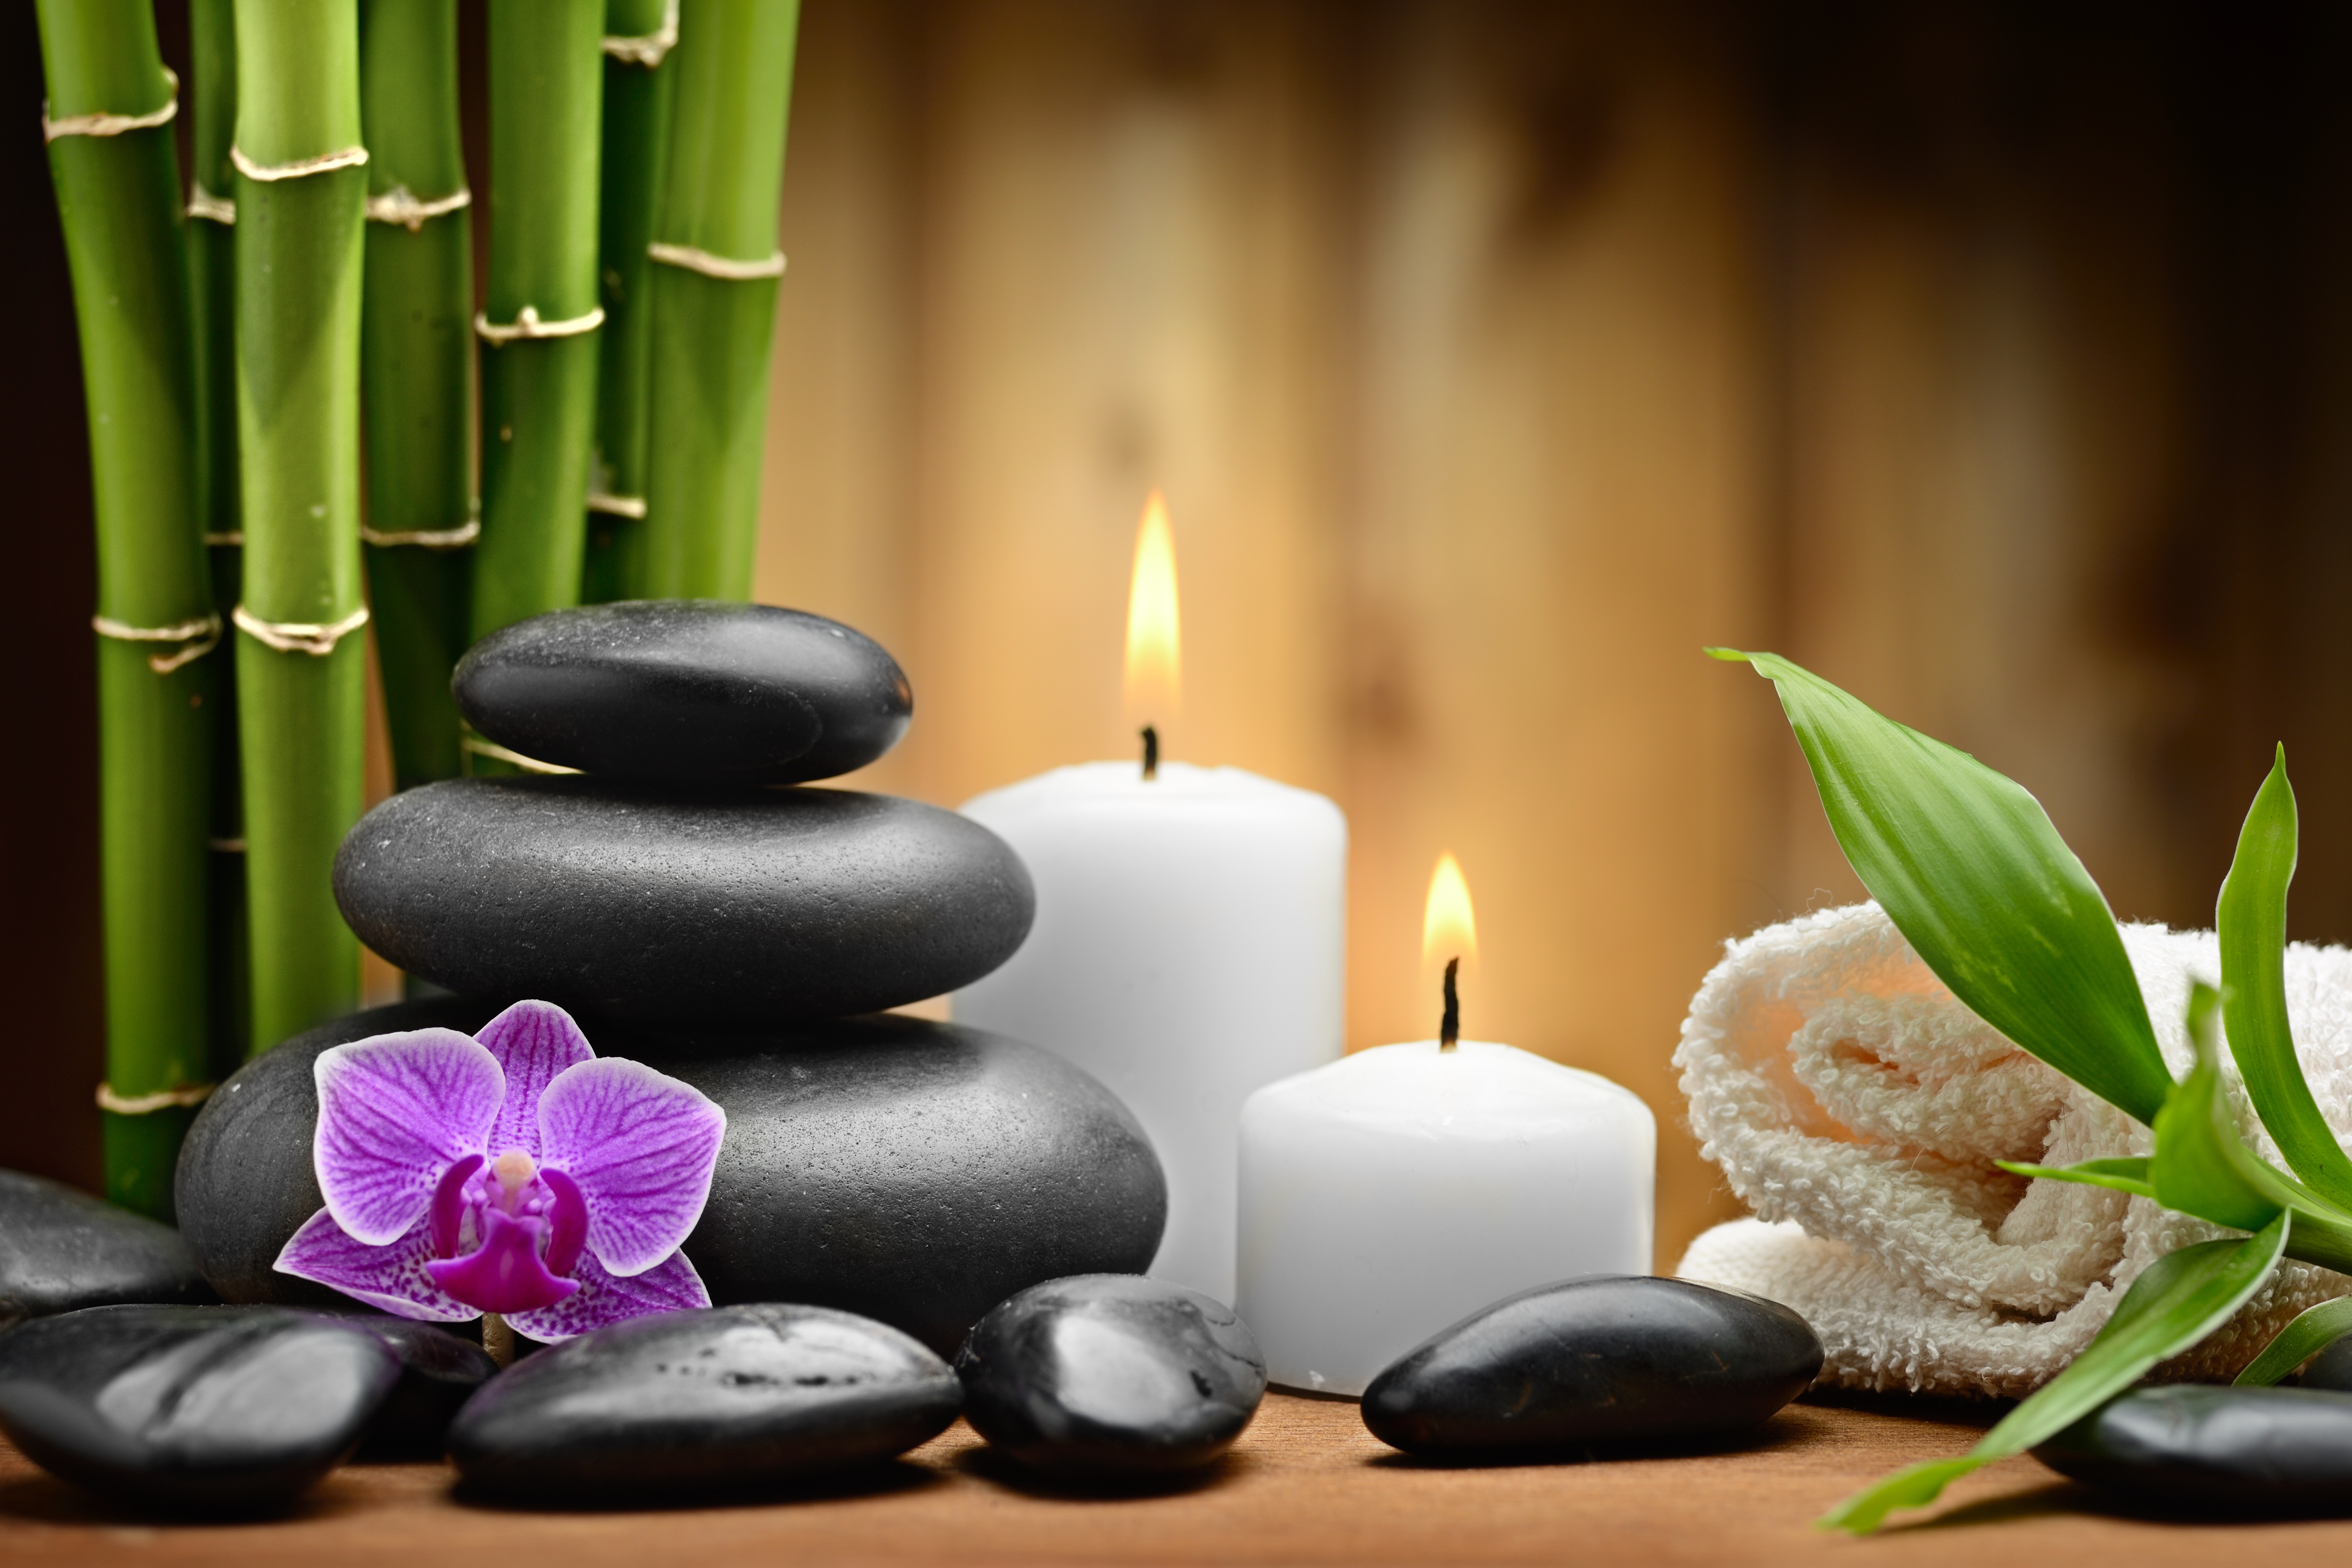 lit candles, black stones, and orchid